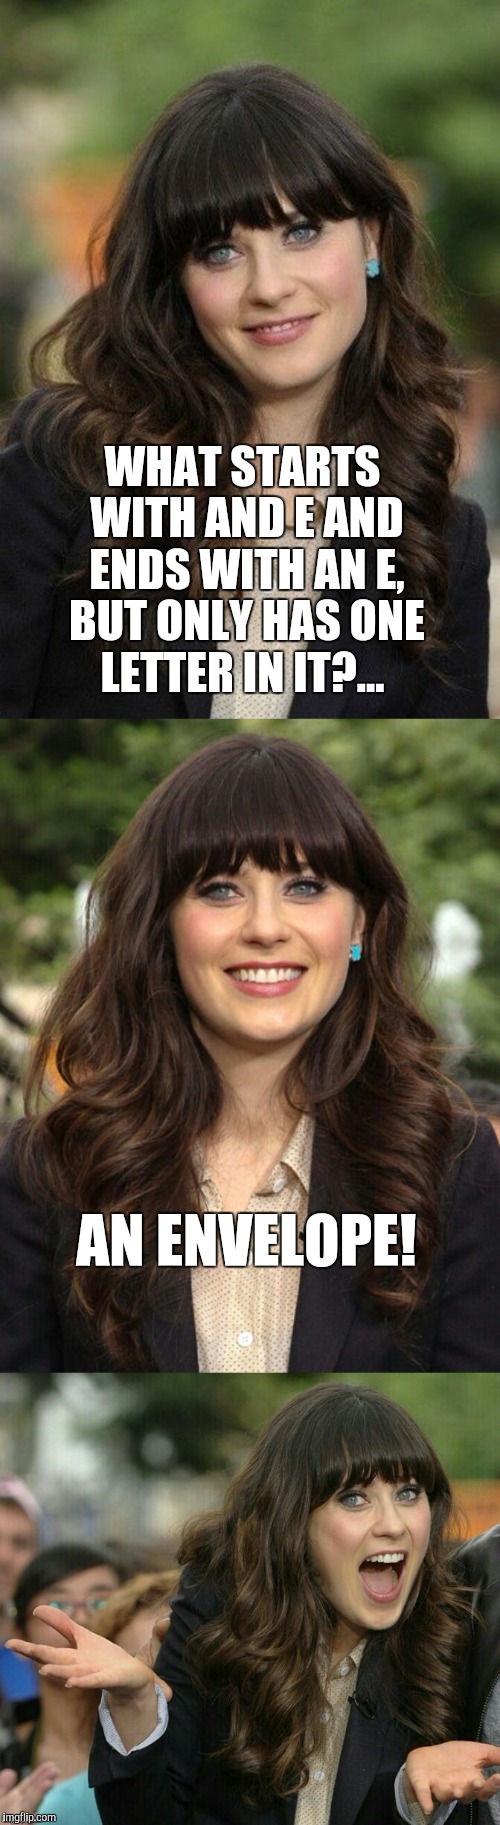 Zooey Deschanel joke template  | WHAT STARTS WITH AND E AND ENDS WITH AN E, BUT ONLY HAS ONE LETTER IN IT?... AN ENVELOPE! | image tagged in zooey deschanel joke template,zooey deschanel,jbmemegeek,bad jokes,bad puns | made w/ Imgflip meme maker